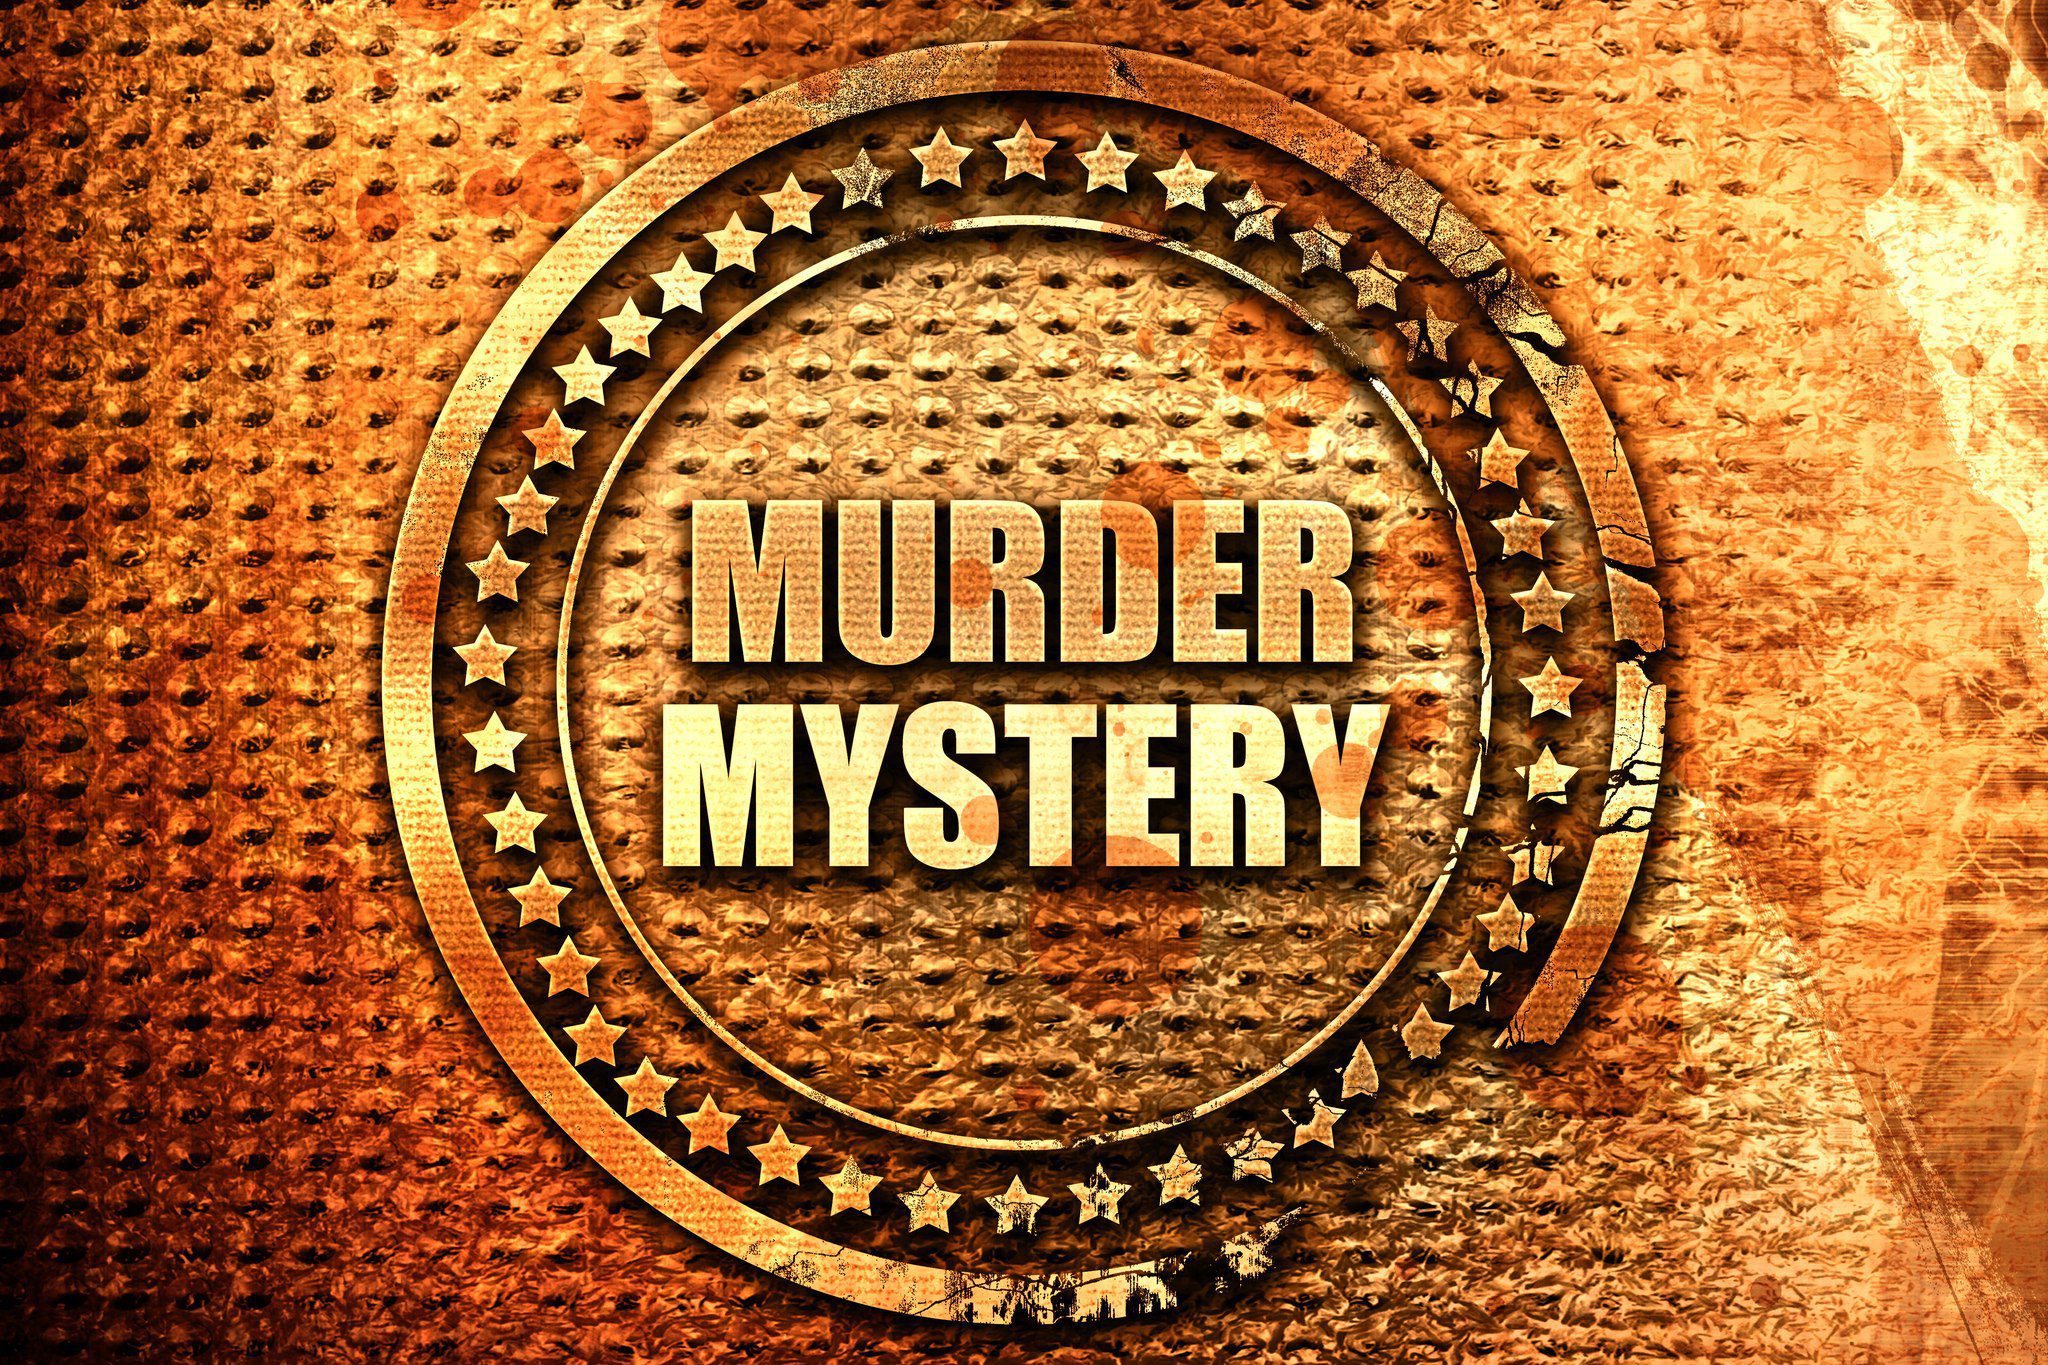 A textured graphic with the words "MURDER MYSTERY" encircled by two rings and stars on a copper-like background.